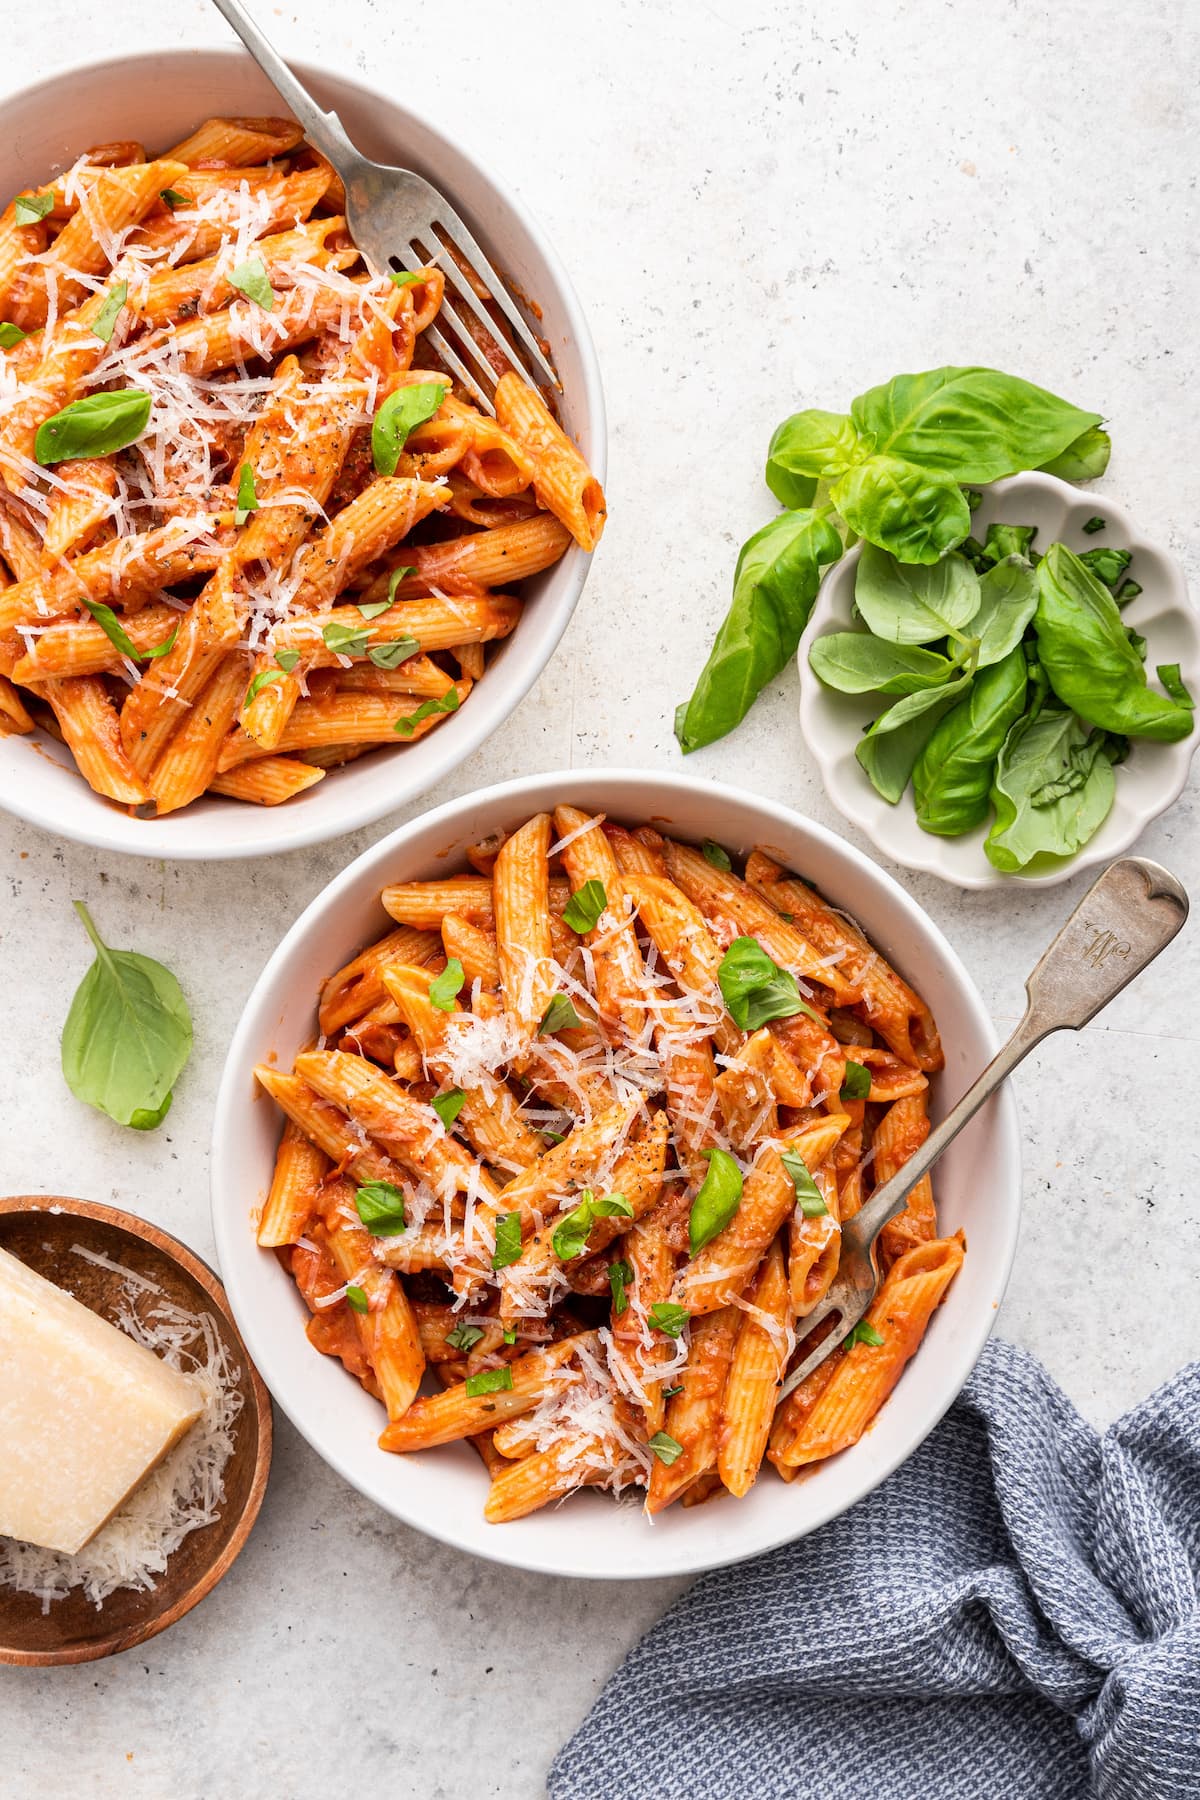 Penne all vodka in two white bowls garnished with fresh basil and a dairy-free parmesan.